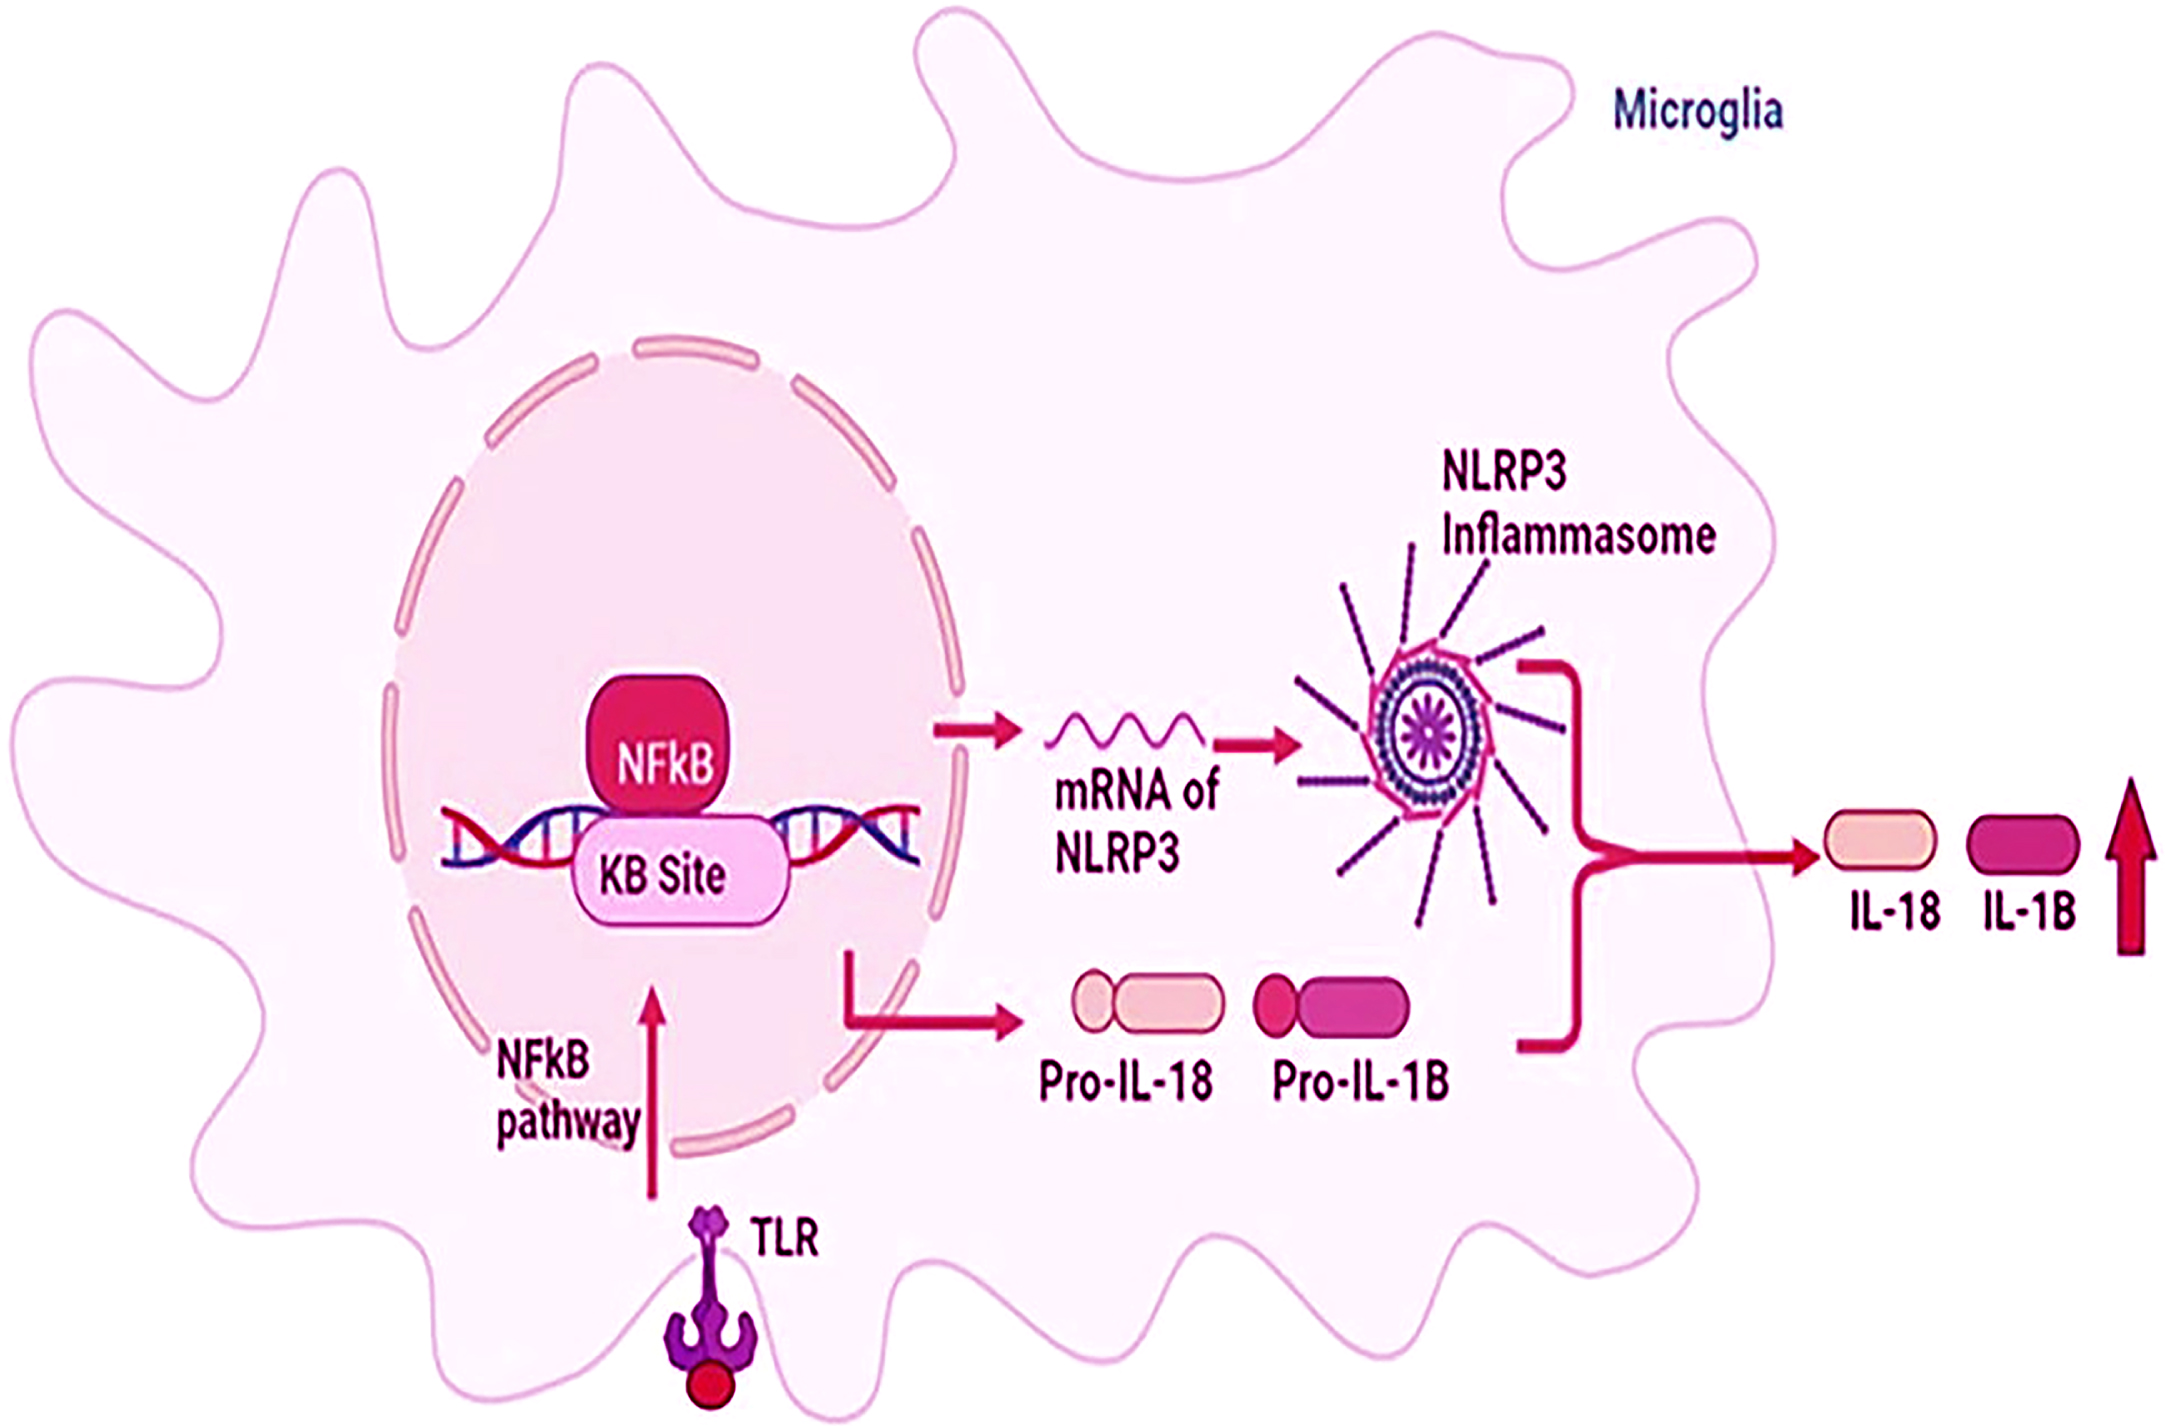 Schematic representation of inflammasome in Alzheimer’s disease (AD) and ischemic stroke (IS). Inflammation is triggered by the activation of the NFkB pathway and NLRP1/3 inflammasome pathway in AD and IS. Finally, IL-18 and IL-1β are produced as proinflammatory cytokines. IL, interleukin; IL-1B, interleukin 1-beta; NF-KB, nuclear factor kappa-light-chain-enhancer of activated B cells; NLRP3, nucleotide-binding oligomerization domain like receptor pyrin domain-containing protein 3; TLR, toll-like receptor.